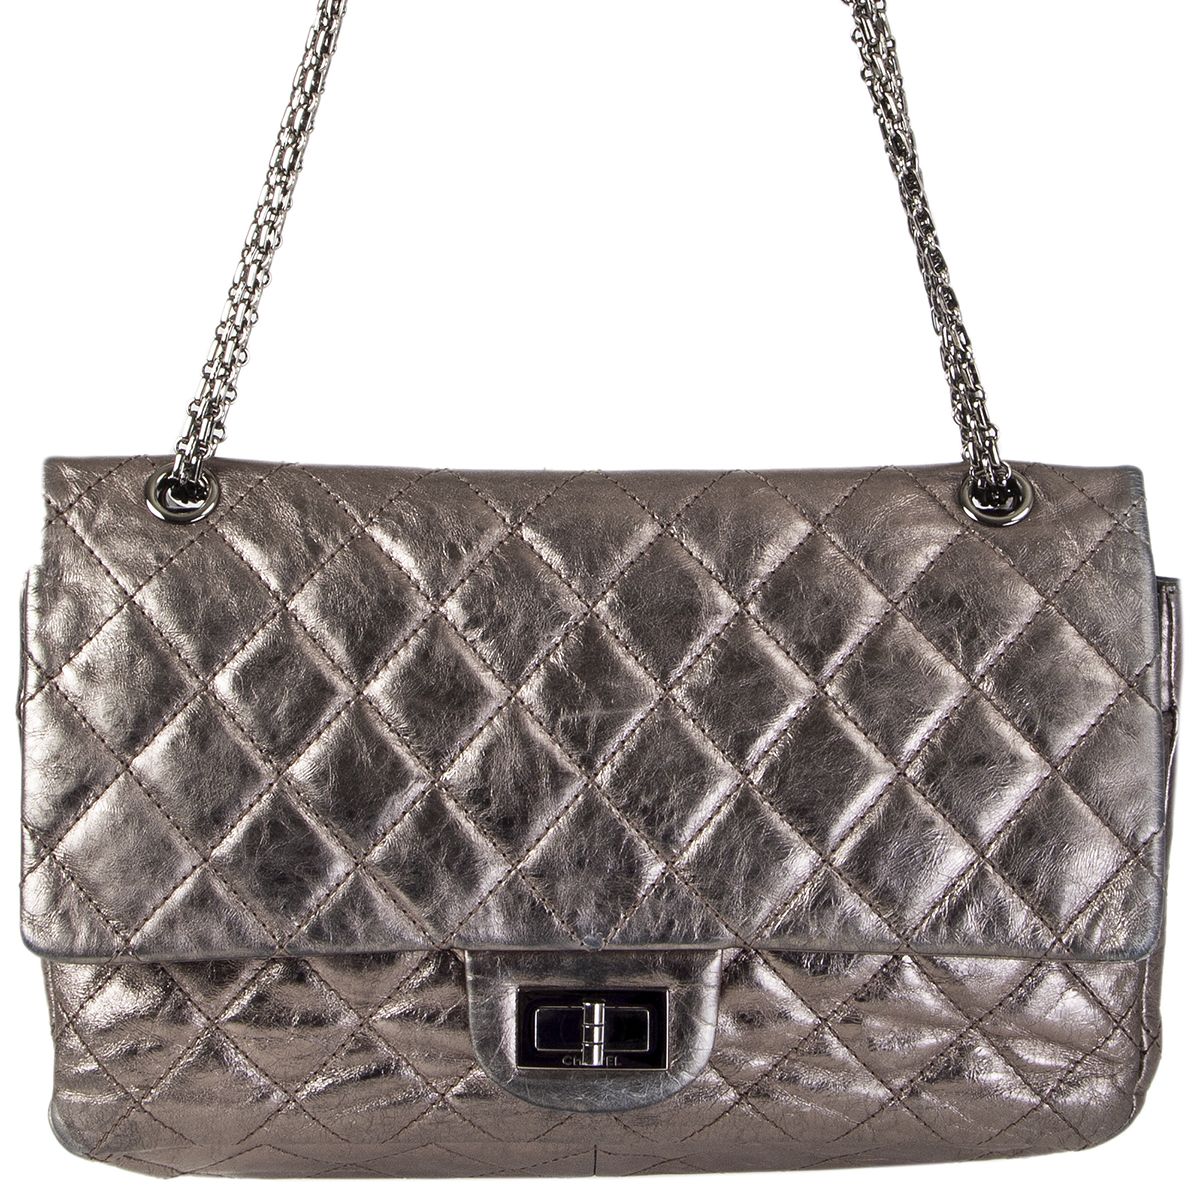 Chanel '2.55 Reissue 227' Double Flap Bag in Metallic Dark Silver Leather